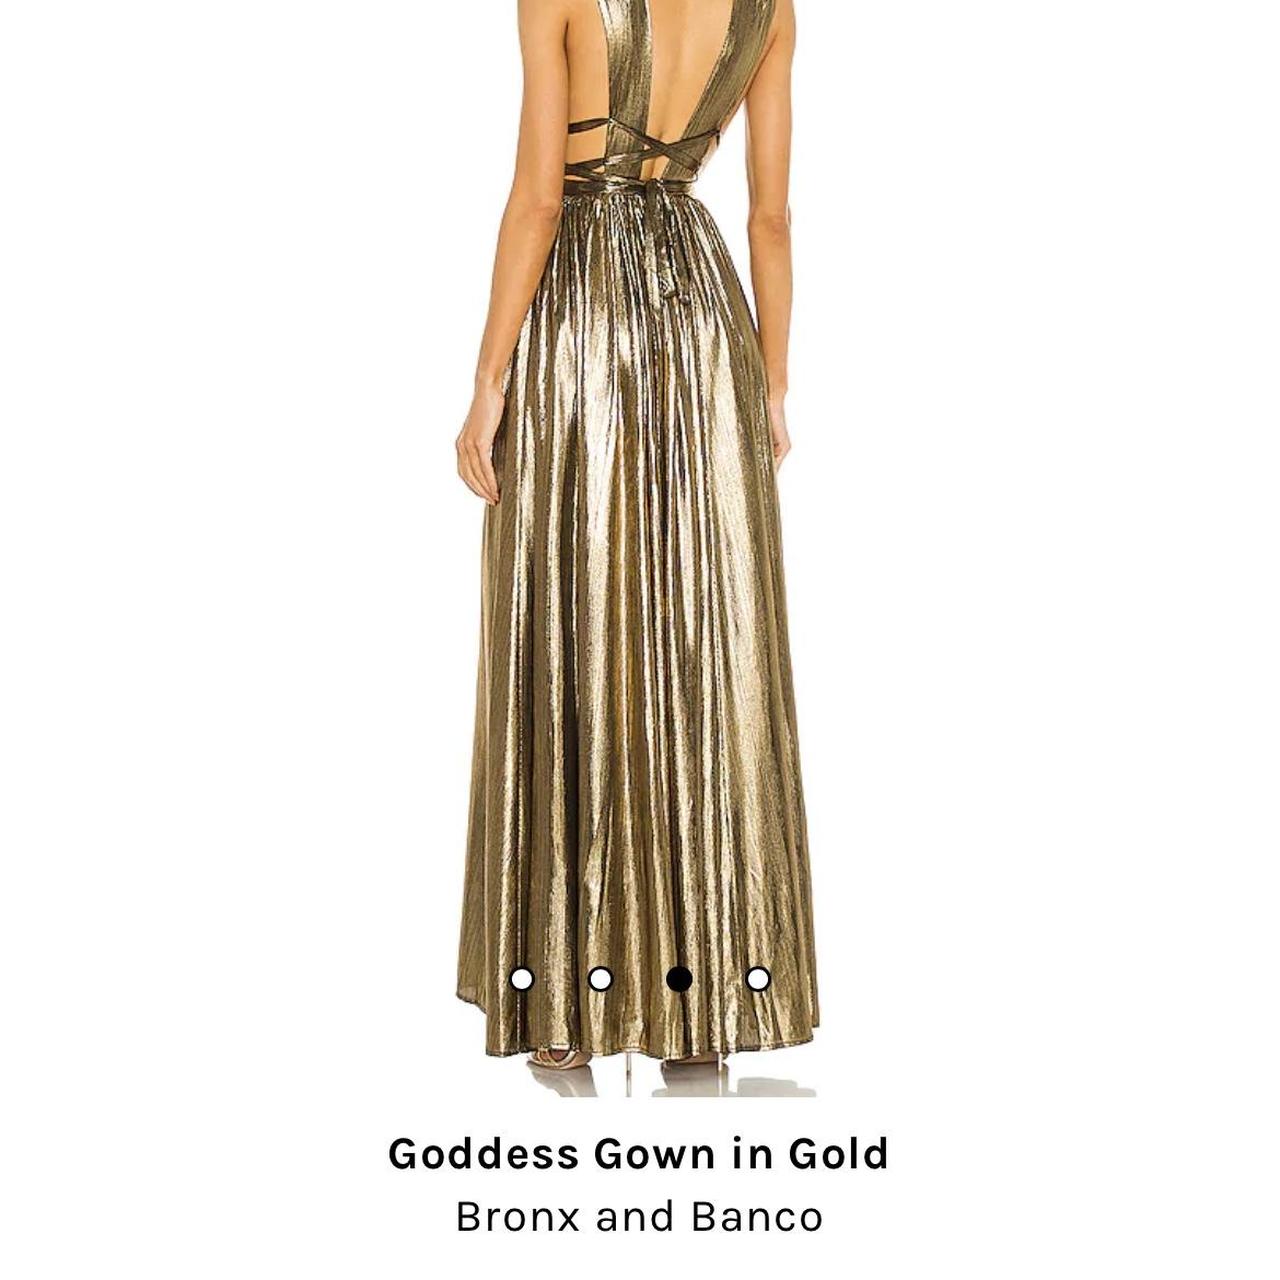 Bronx and Banco Goddess gown in Gold, Size XS, worn... - Depop